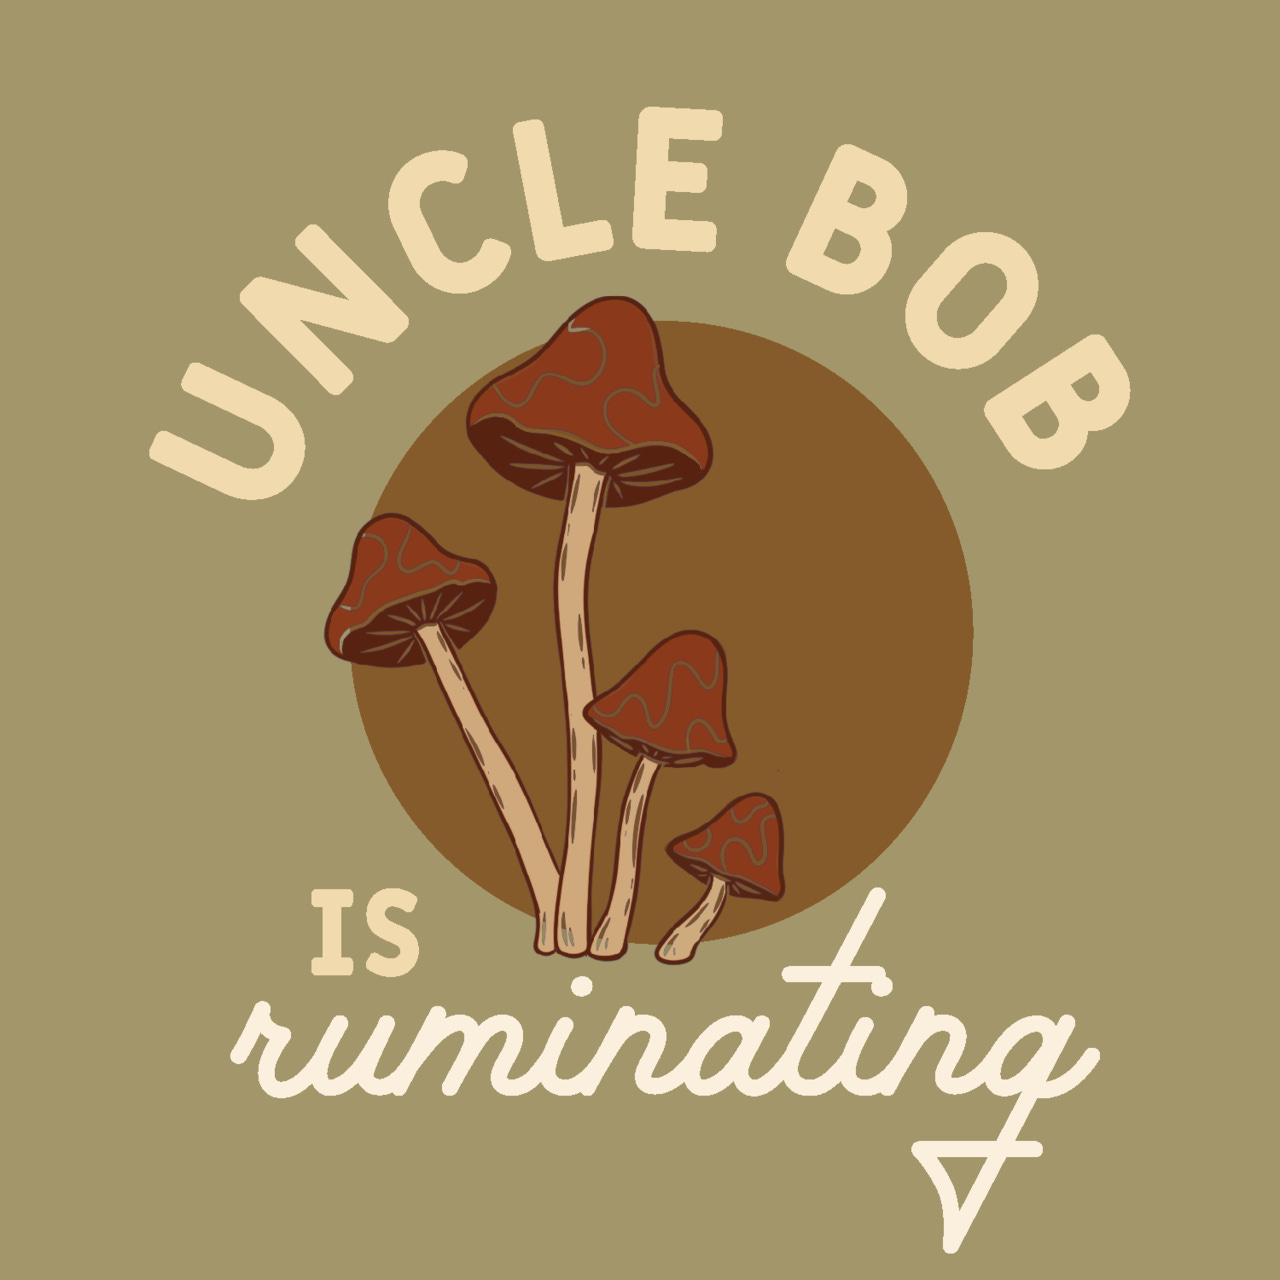 Uncle Bob Is Ruminating